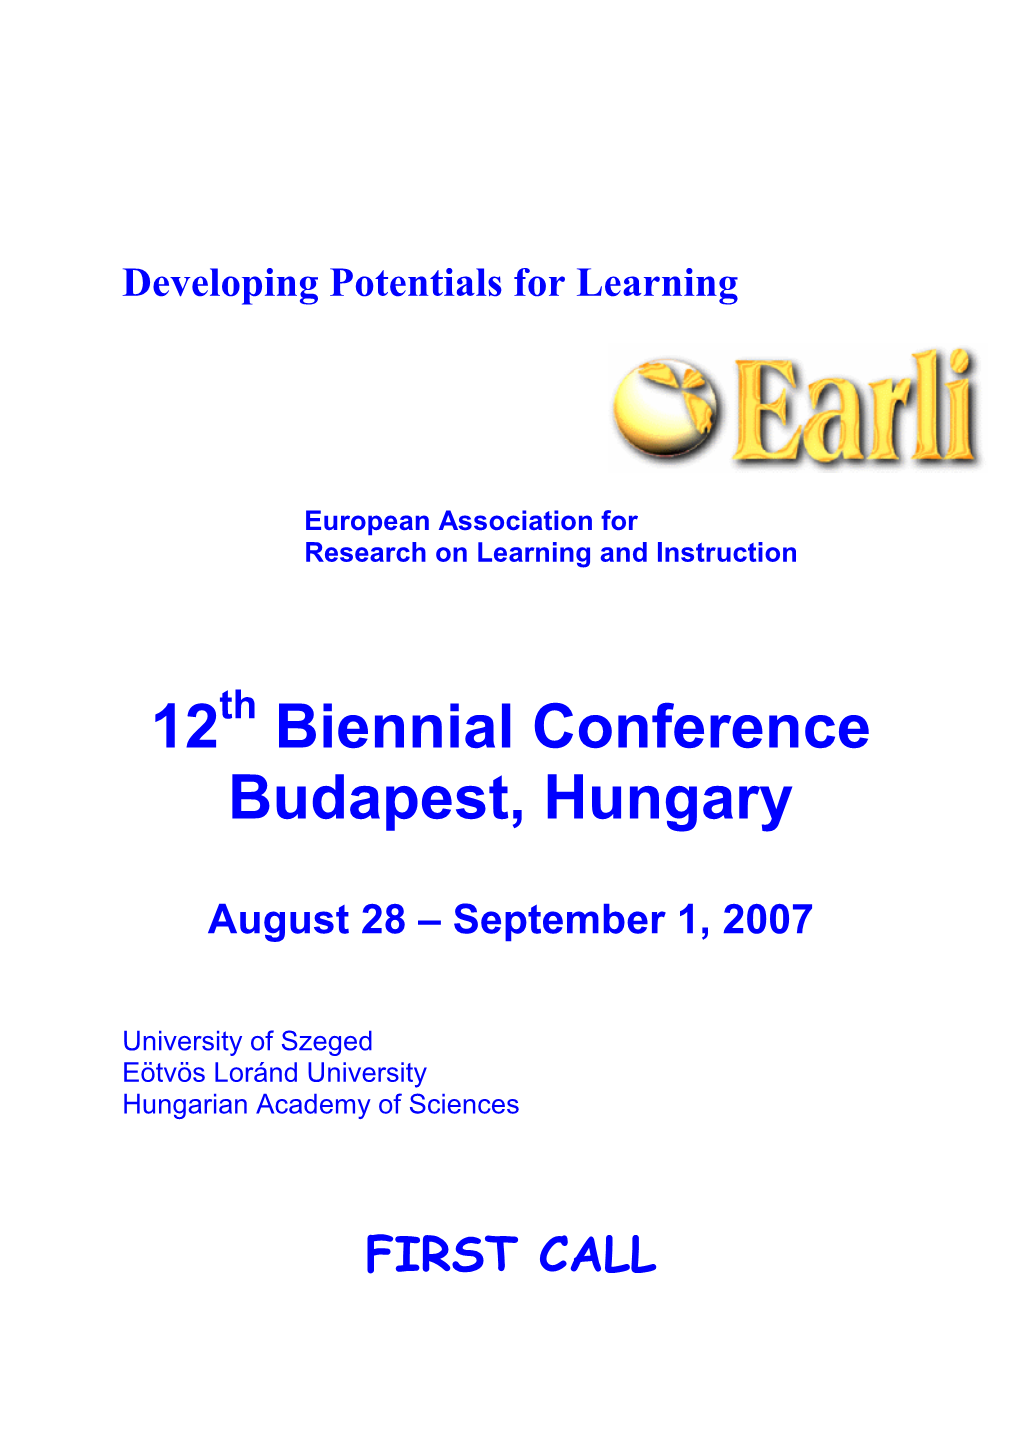 12 Biennial Conference Budapest, Hungary